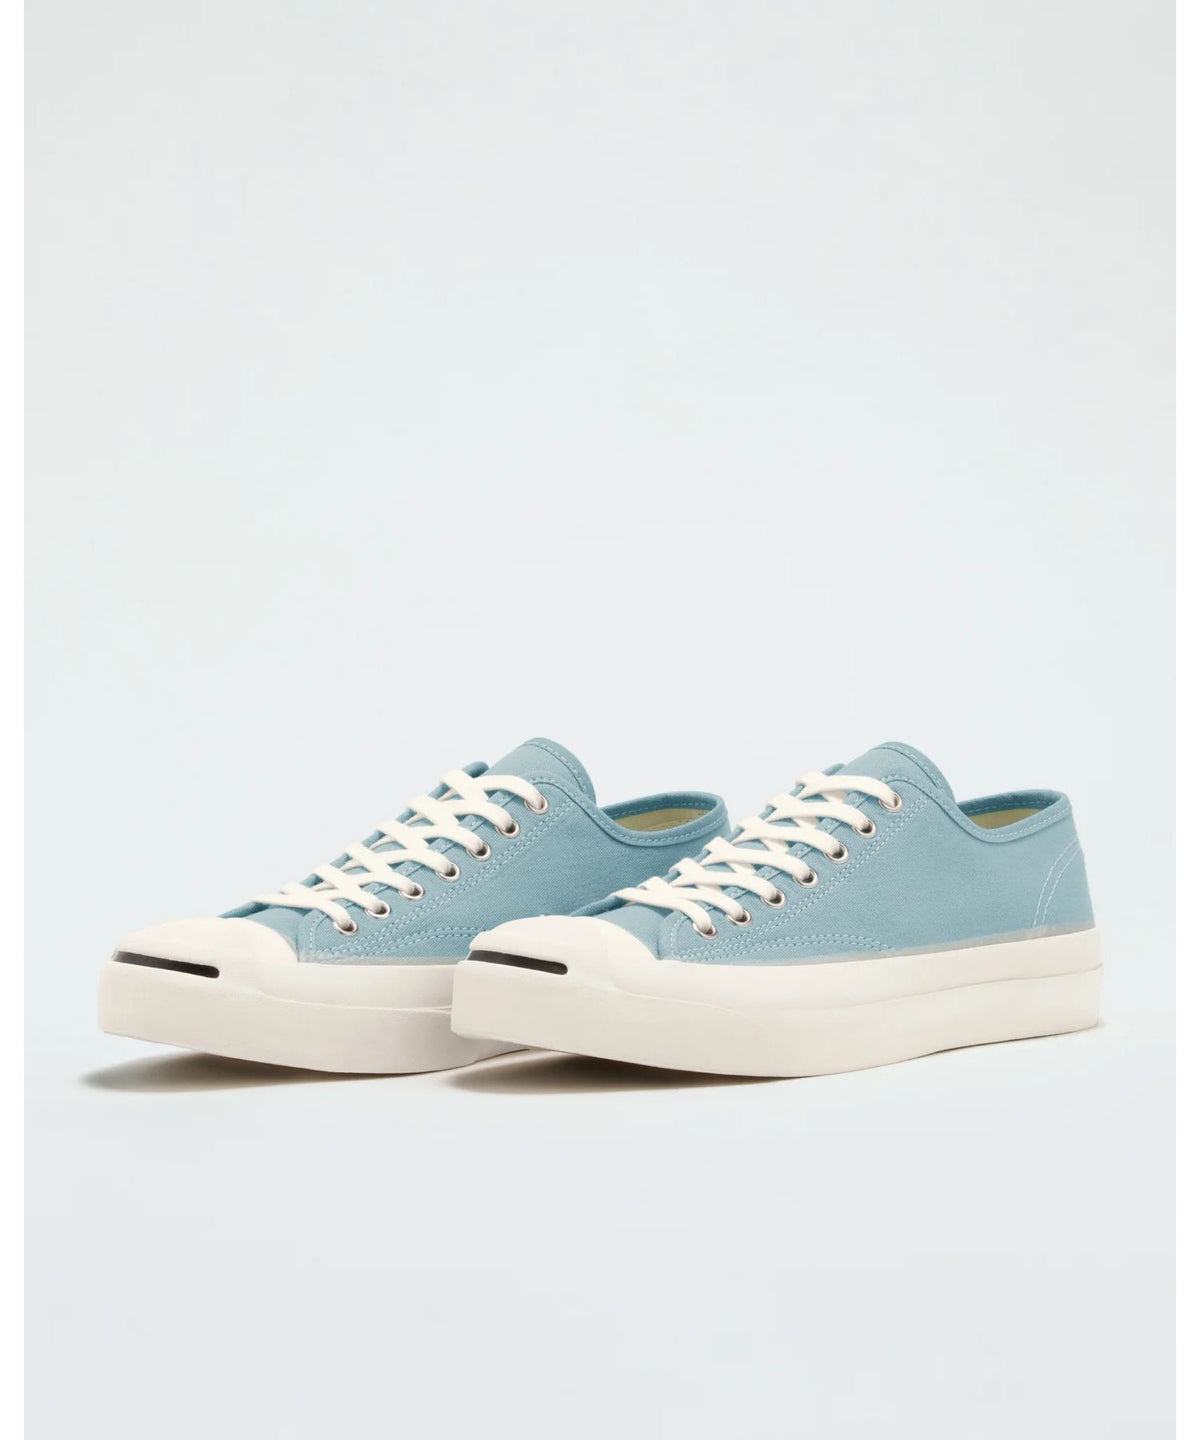 Jack Purcell Canvas